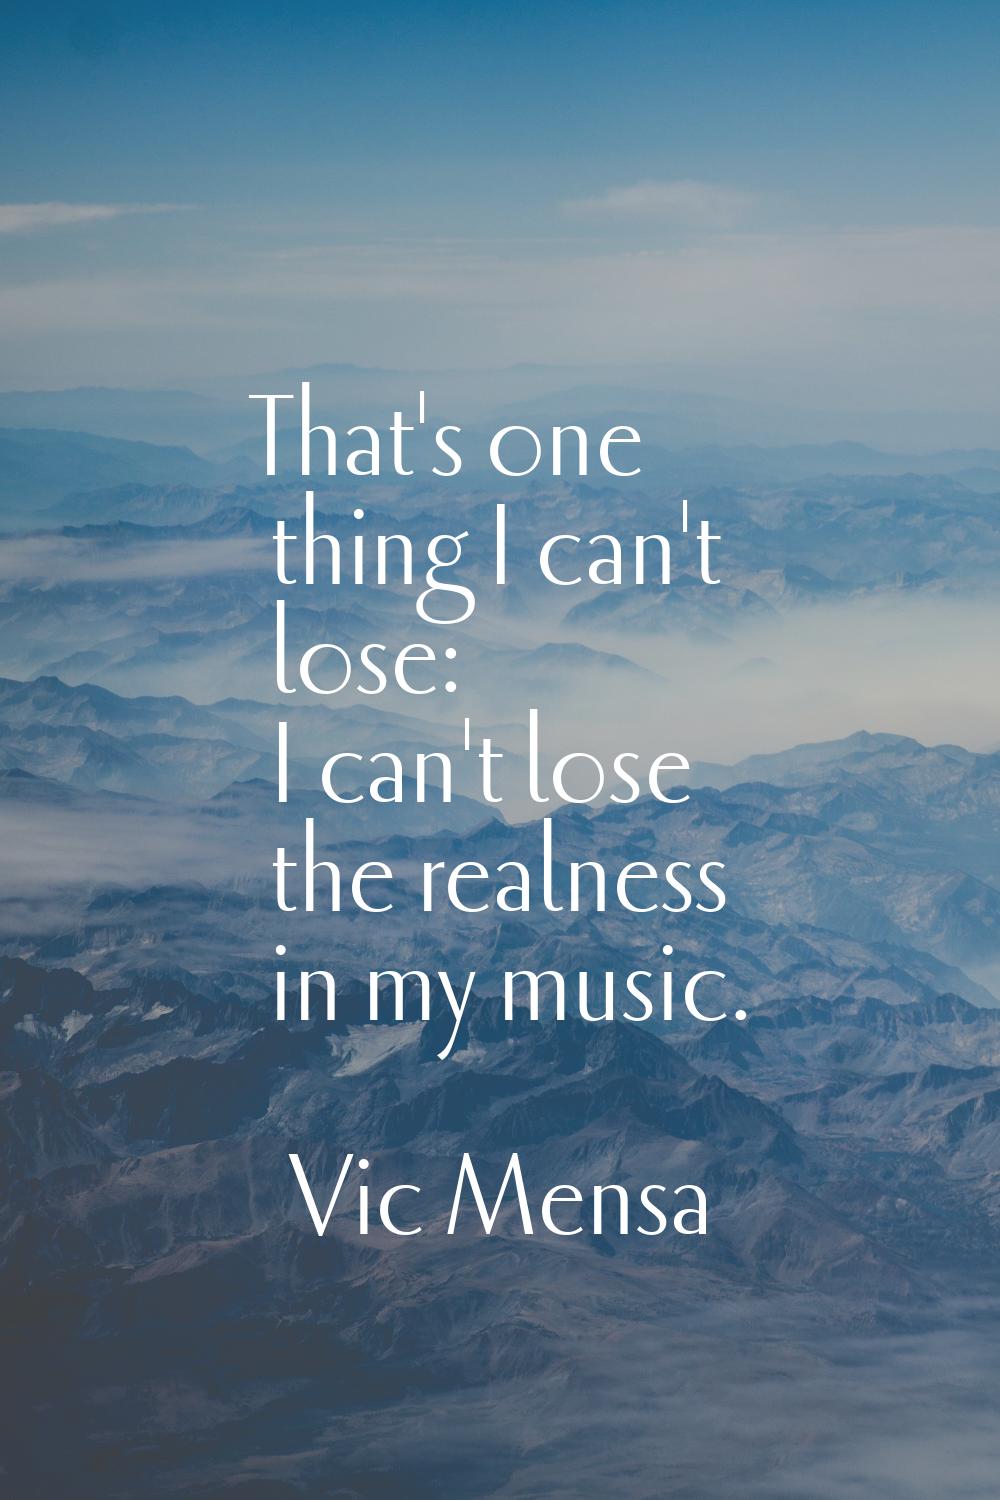 That's one thing I can't lose: I can't lose the realness in my music.